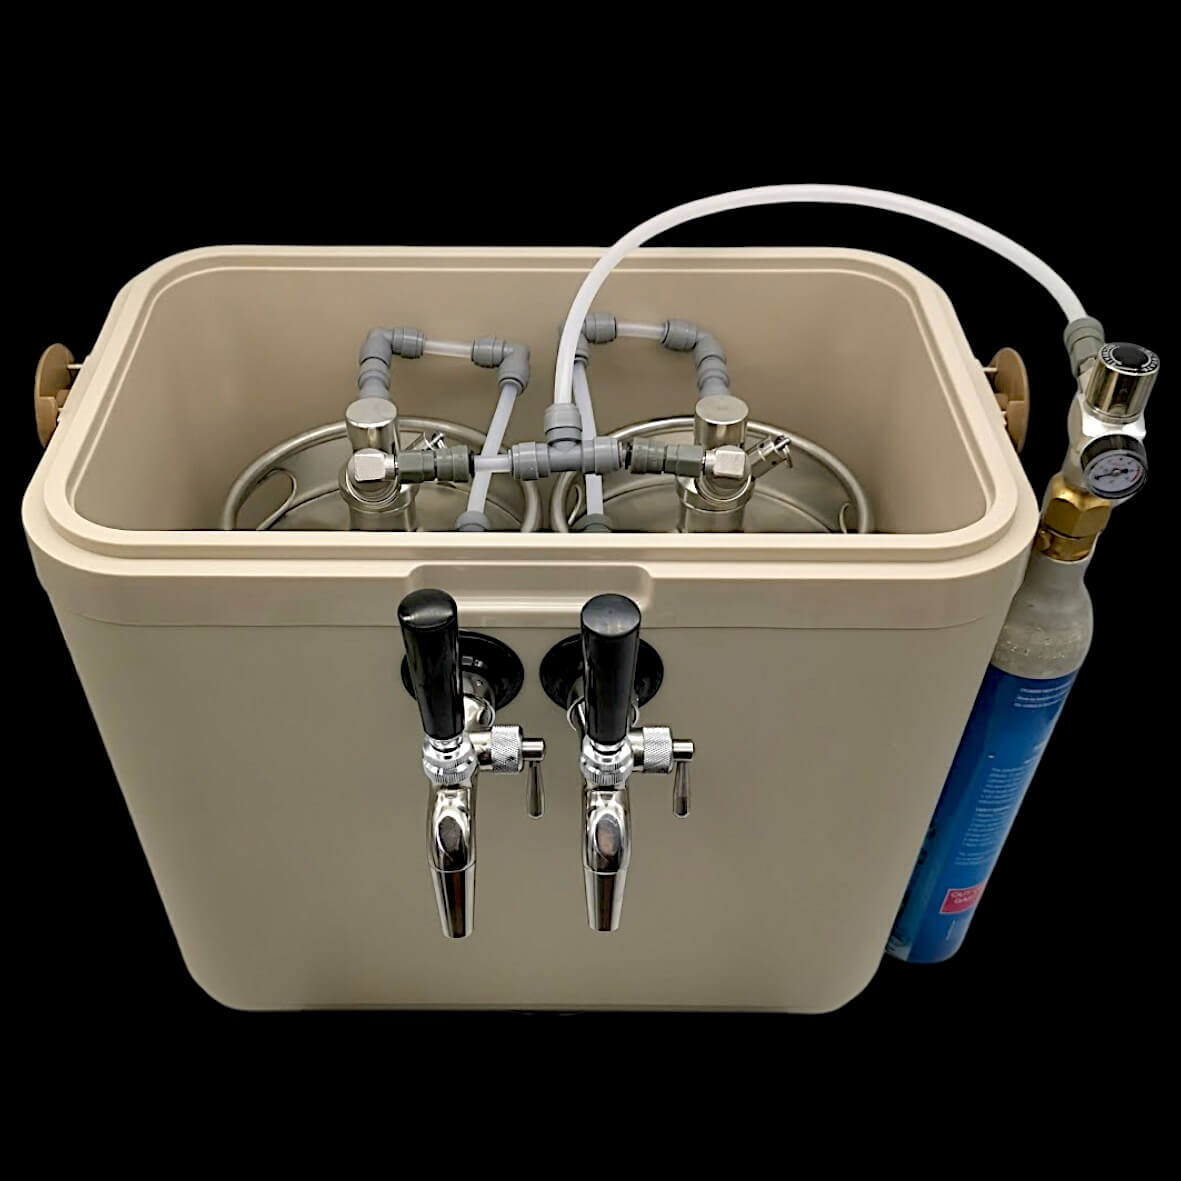 jockey box, front view of tap with the lid off to show the internal 5l kegs and fittings